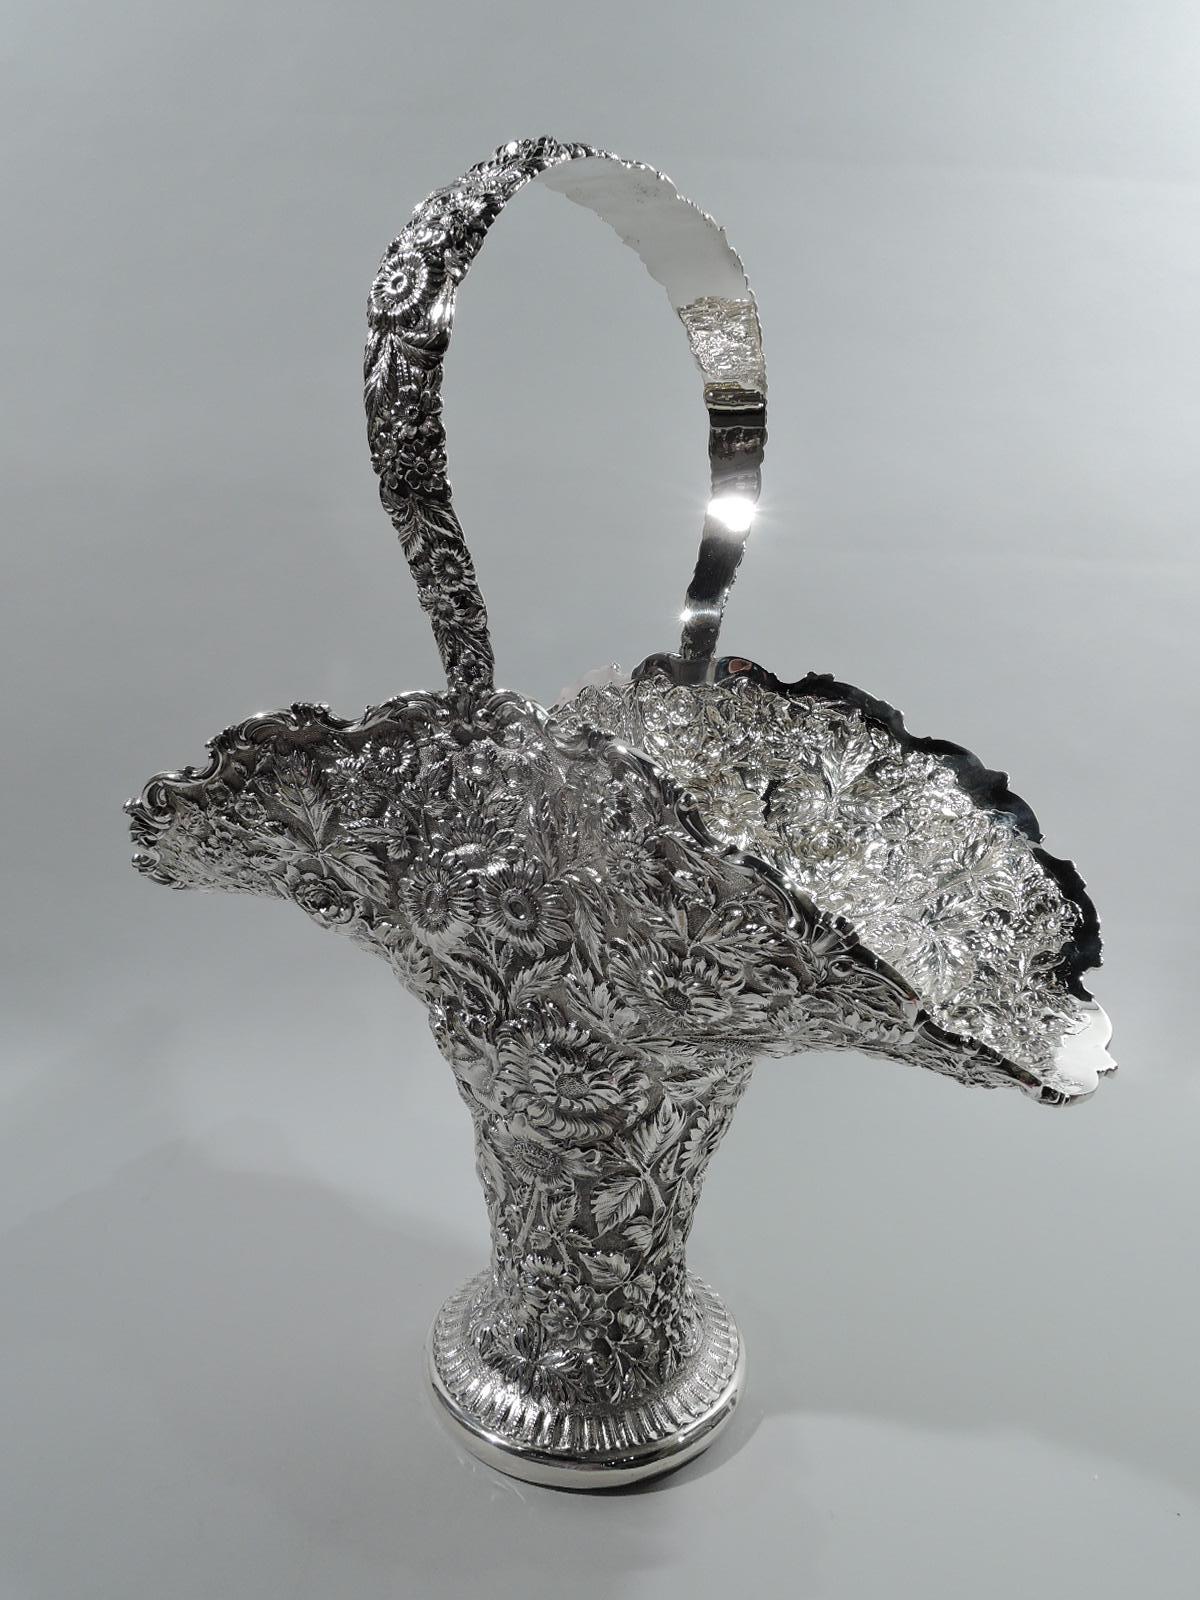 Victorian sterling silver basket. Made by the Stieff Company in Baltimore, ca 1910. Wide and ovoid mouth with fixed c-scroll handle and cylindrical body flowing into spread foot. Dense allover floral repousse on stippled ground. Mouth rim has